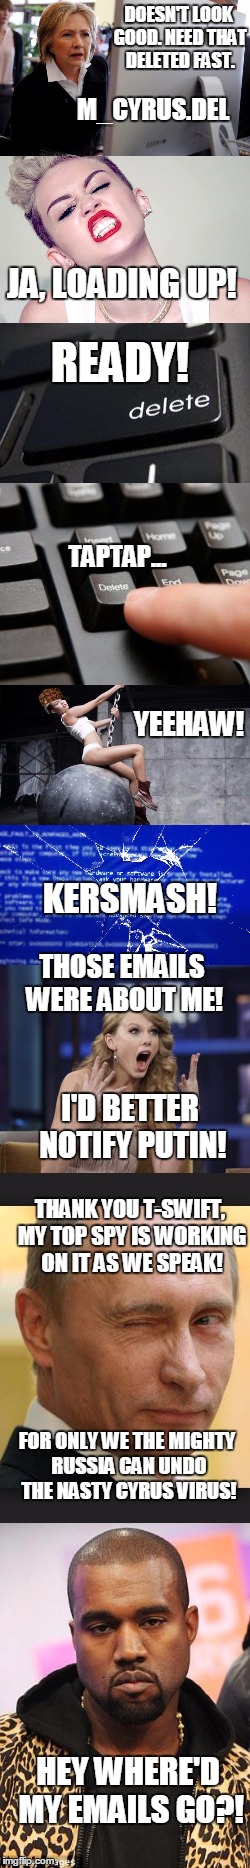 Chasing Emails | DOESN'T LOOK GOOD. NEED THAT DELETED FAST. M_CYRUS.DEL; JA, LOADING UP! READY! TAPTAP... YEEHAW! KERSMASH! THOSE EMAILS WERE ABOUT ME! I'D BETTER NOTIFY PUTIN! THANK YOU T-SWIFT, MY TOP SPY IS WORKING ON IT AS WE SPEAK! FOR ONLY WE THE MIGHTY RUSSIA CAN UNDO THE NASTY CYRUS VIRUS! HEY WHERE'D MY EMAILS GO?! | image tagged in clinton email,miley cyrus,taylor swift,putin,kanye west | made w/ Imgflip meme maker